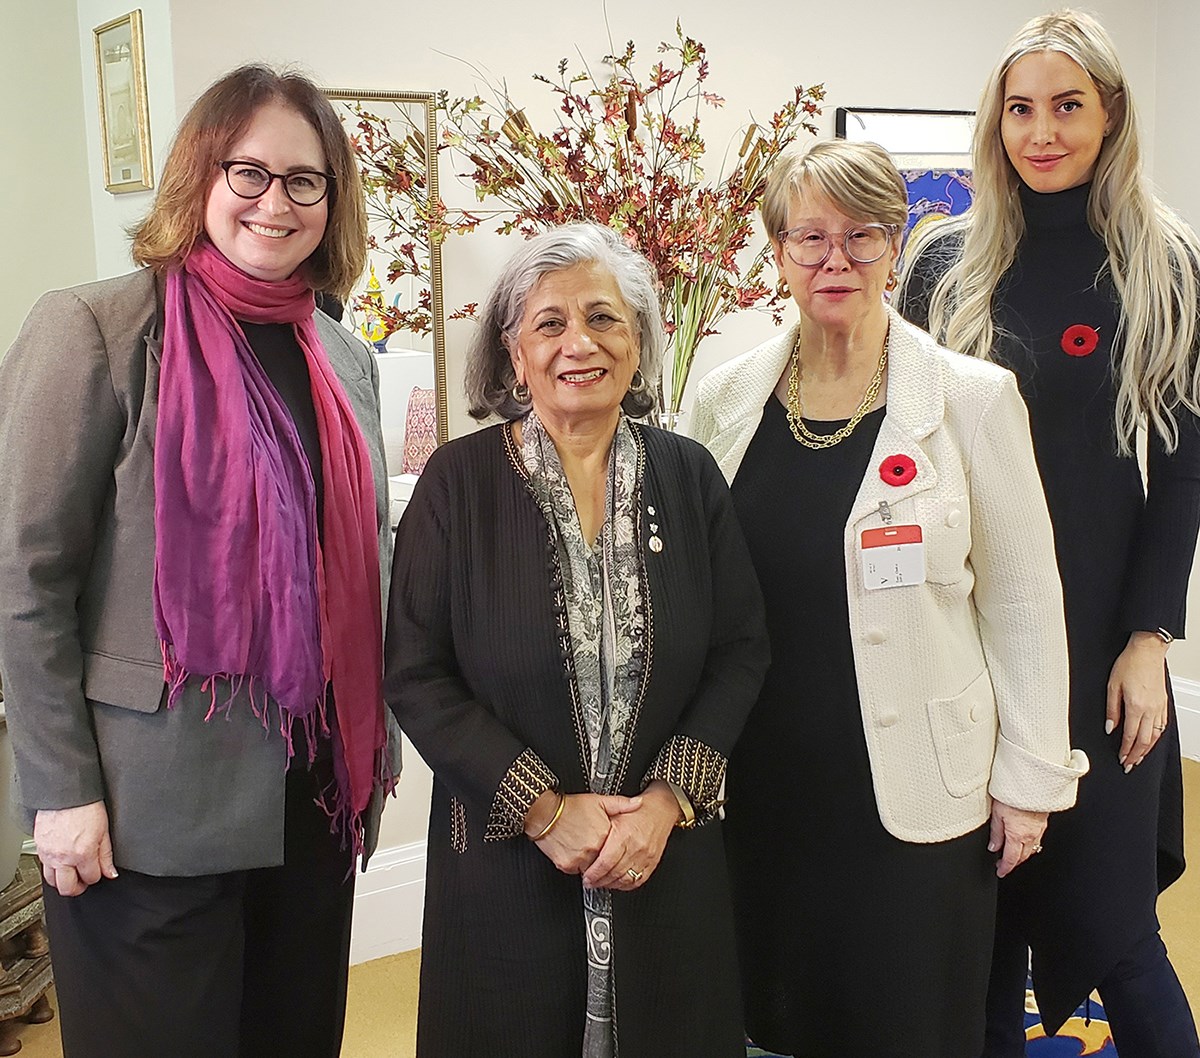 Tuesday, November 1, 2022 – Senator Ratna Omidvar, second left, meets with representatives from Achēv, a community-based organization that offers employment, language, newcomer and youth services in the Greater Toronto Area. From left, Moya MacKinnon, senior vice-president of strategic partnerships and external relations, Tonie Chaltas, chief executive officer, and Kristen Neagle, manager of government relations and strategic partnerships, joined the senator at her office on Parliament Hill to discuss career development, language education and immigrant settlement.